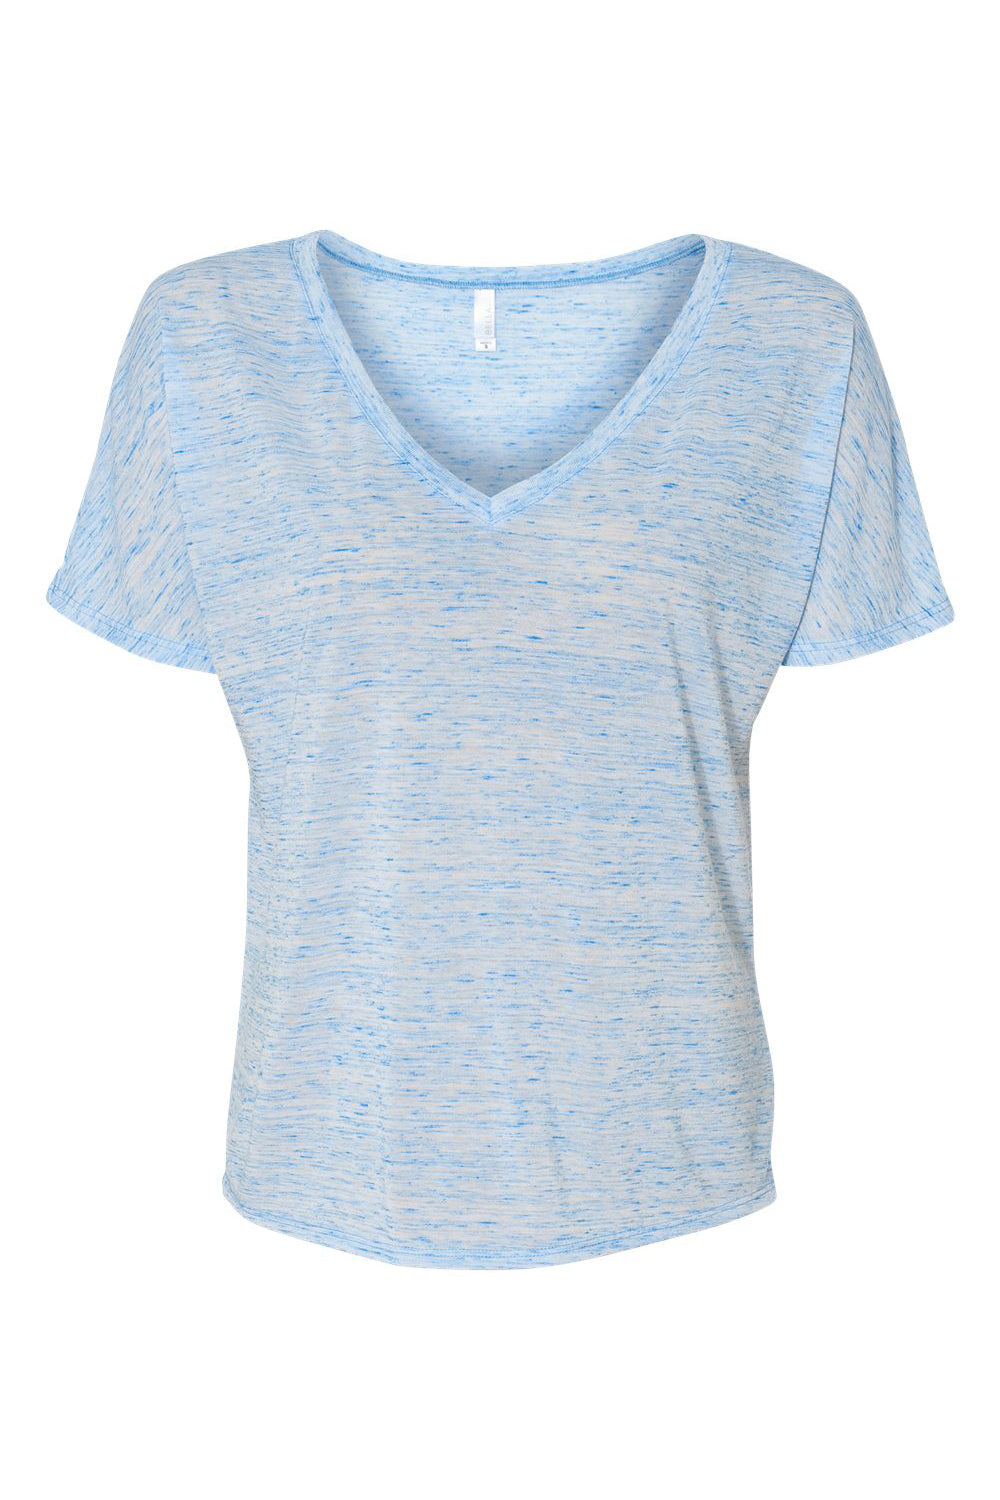 Bella + Canvas 8815 Womens Slouchy Short Sleeve V-Neck T-Shirt Blue Marble Flat Front